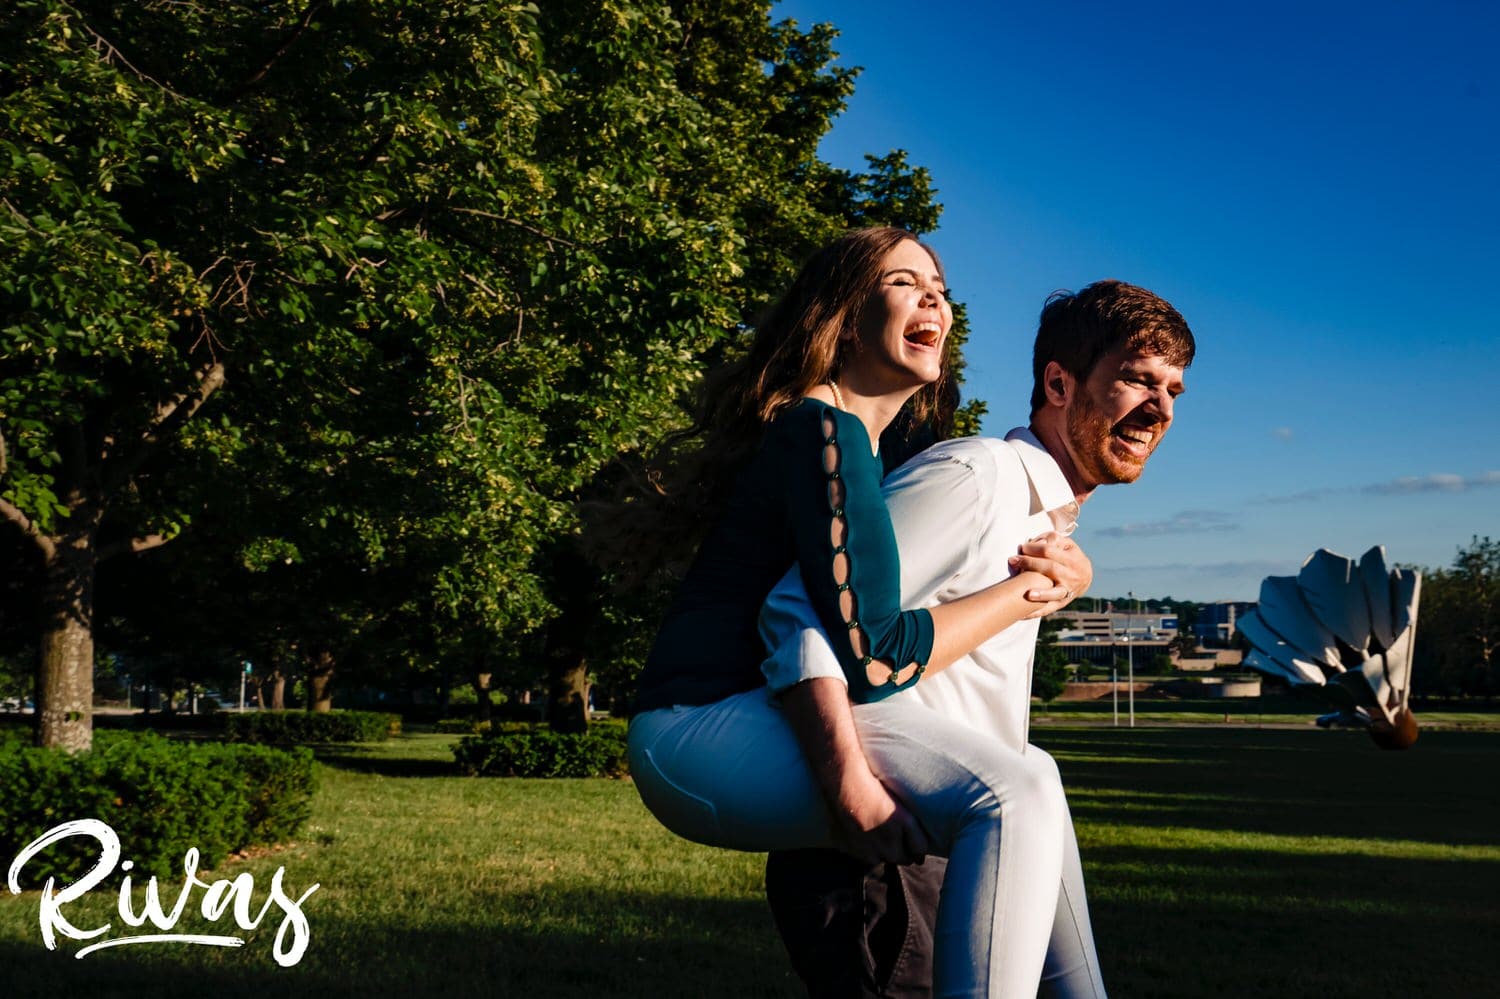 A colorful, candid picture of a man carrying his fiance piggyback during their summer engagement session in Kansas City. 